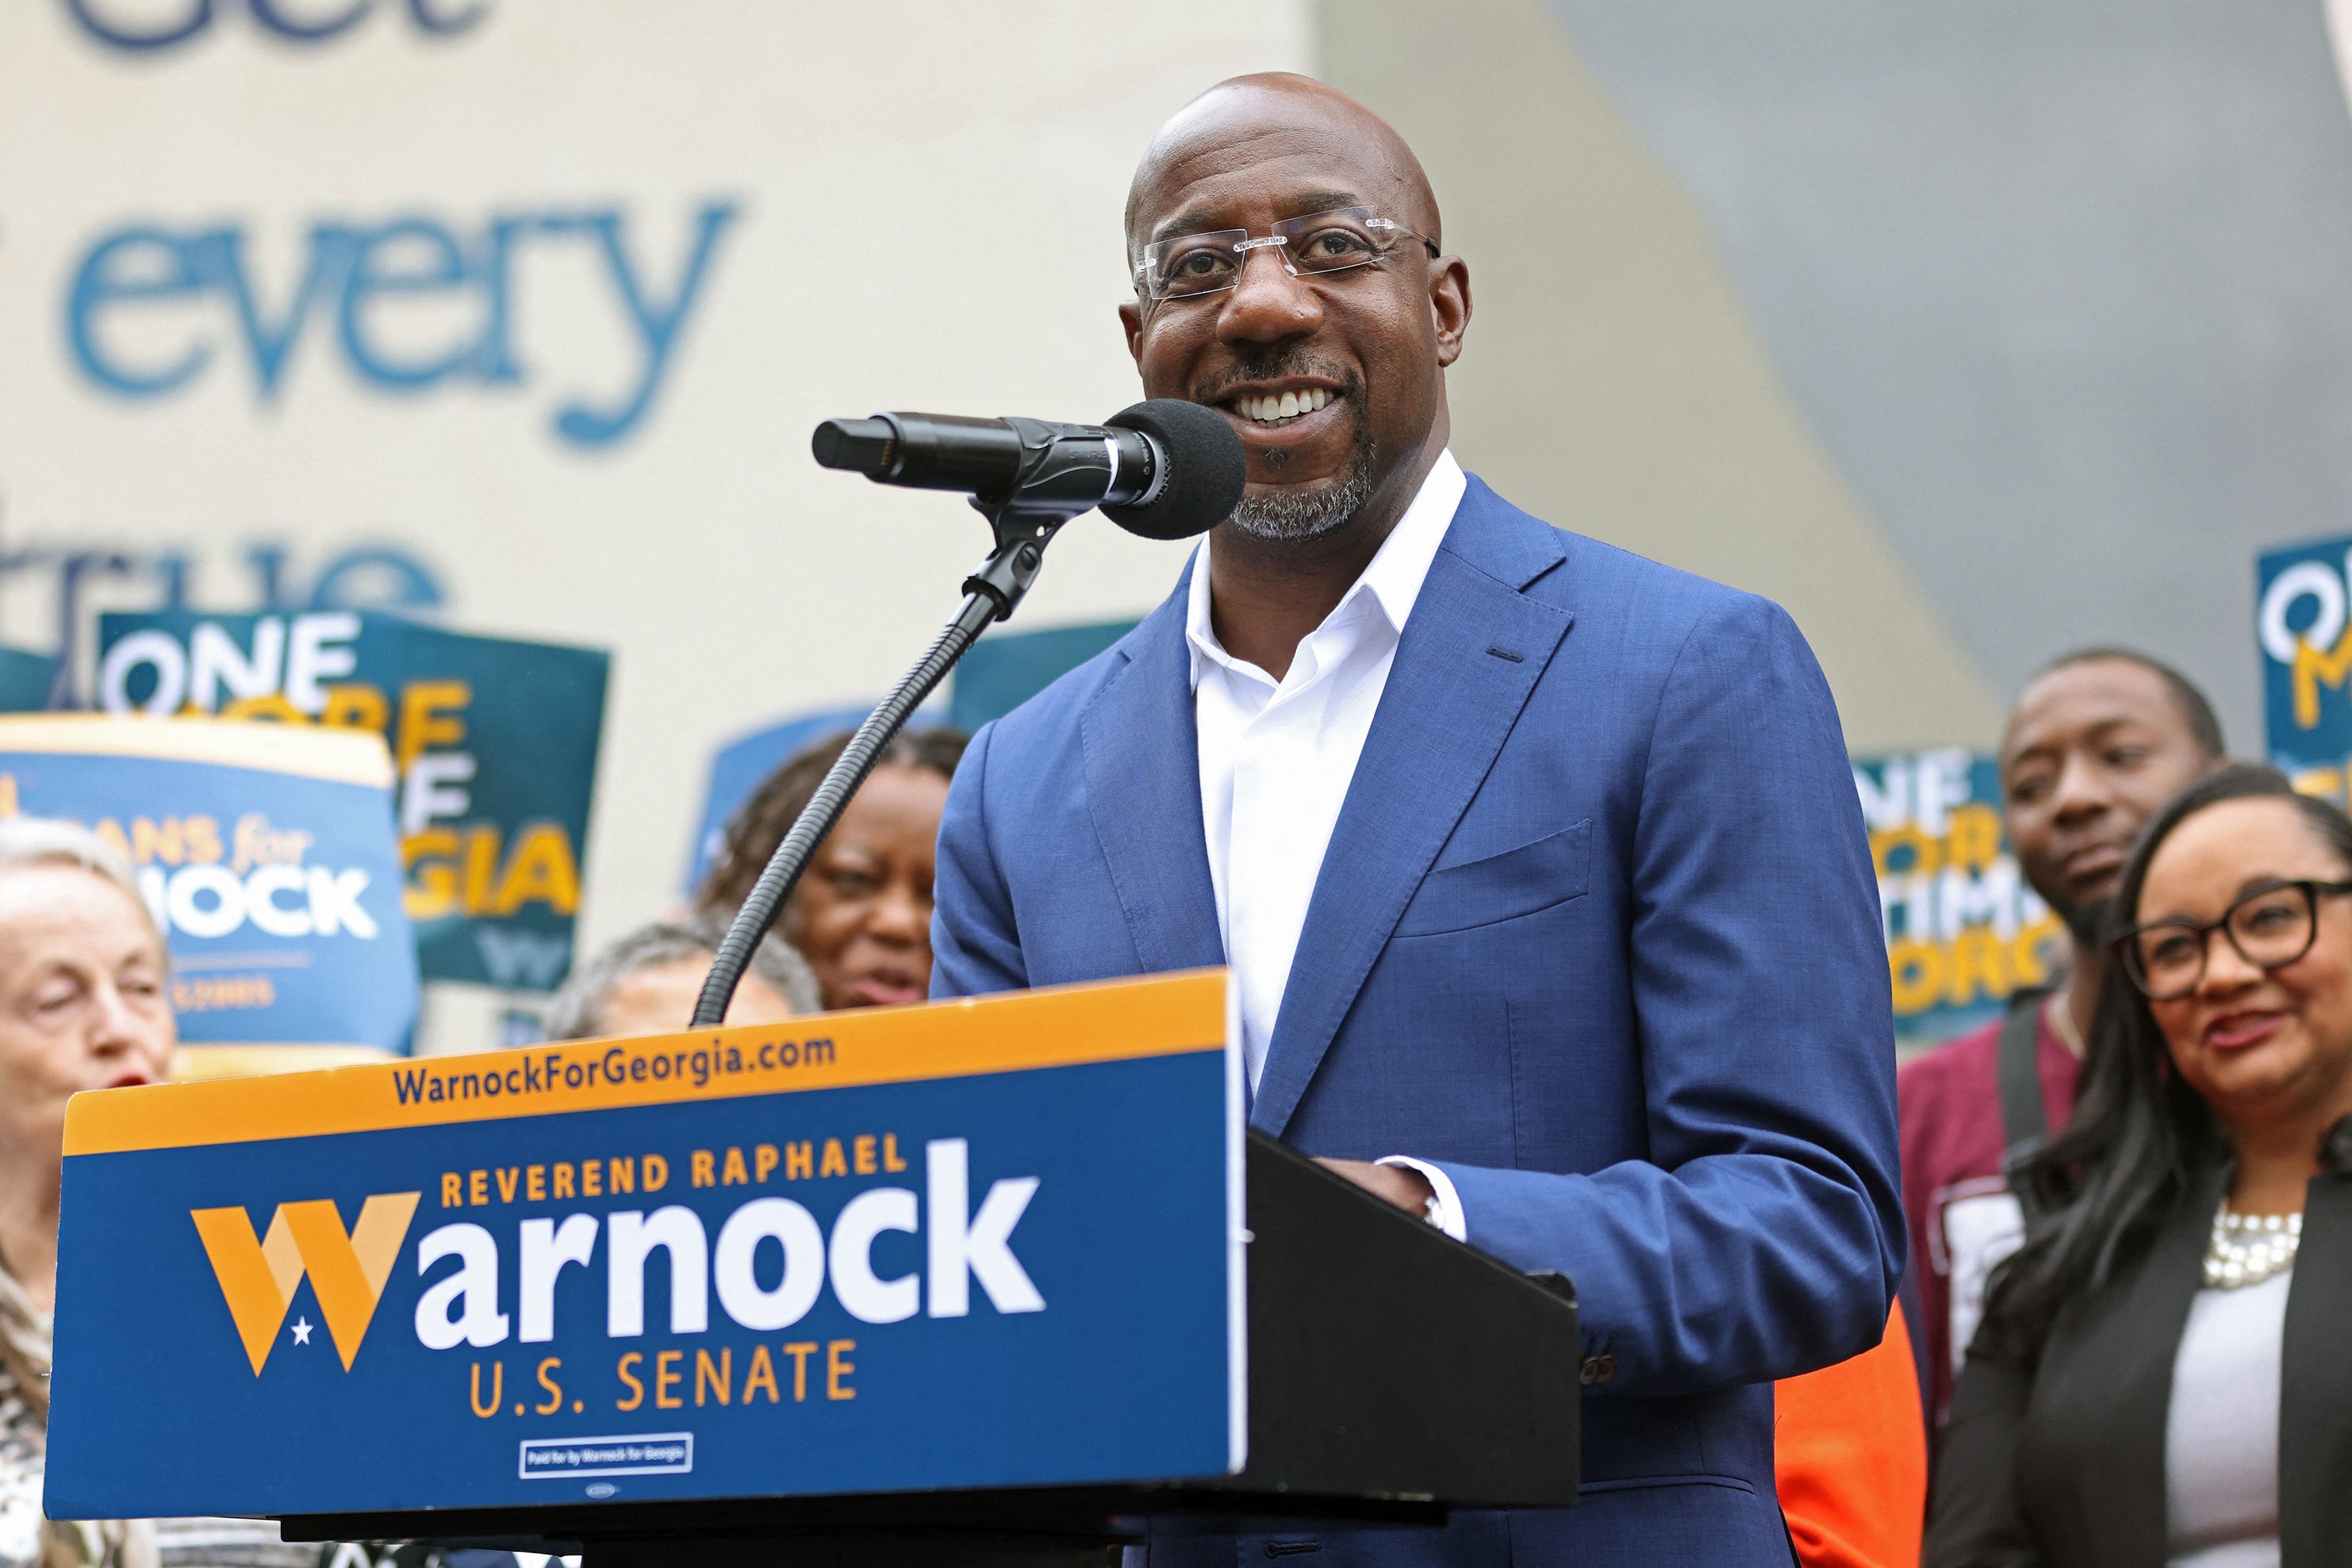 Raphael Warnock stands at a podium and smiles.